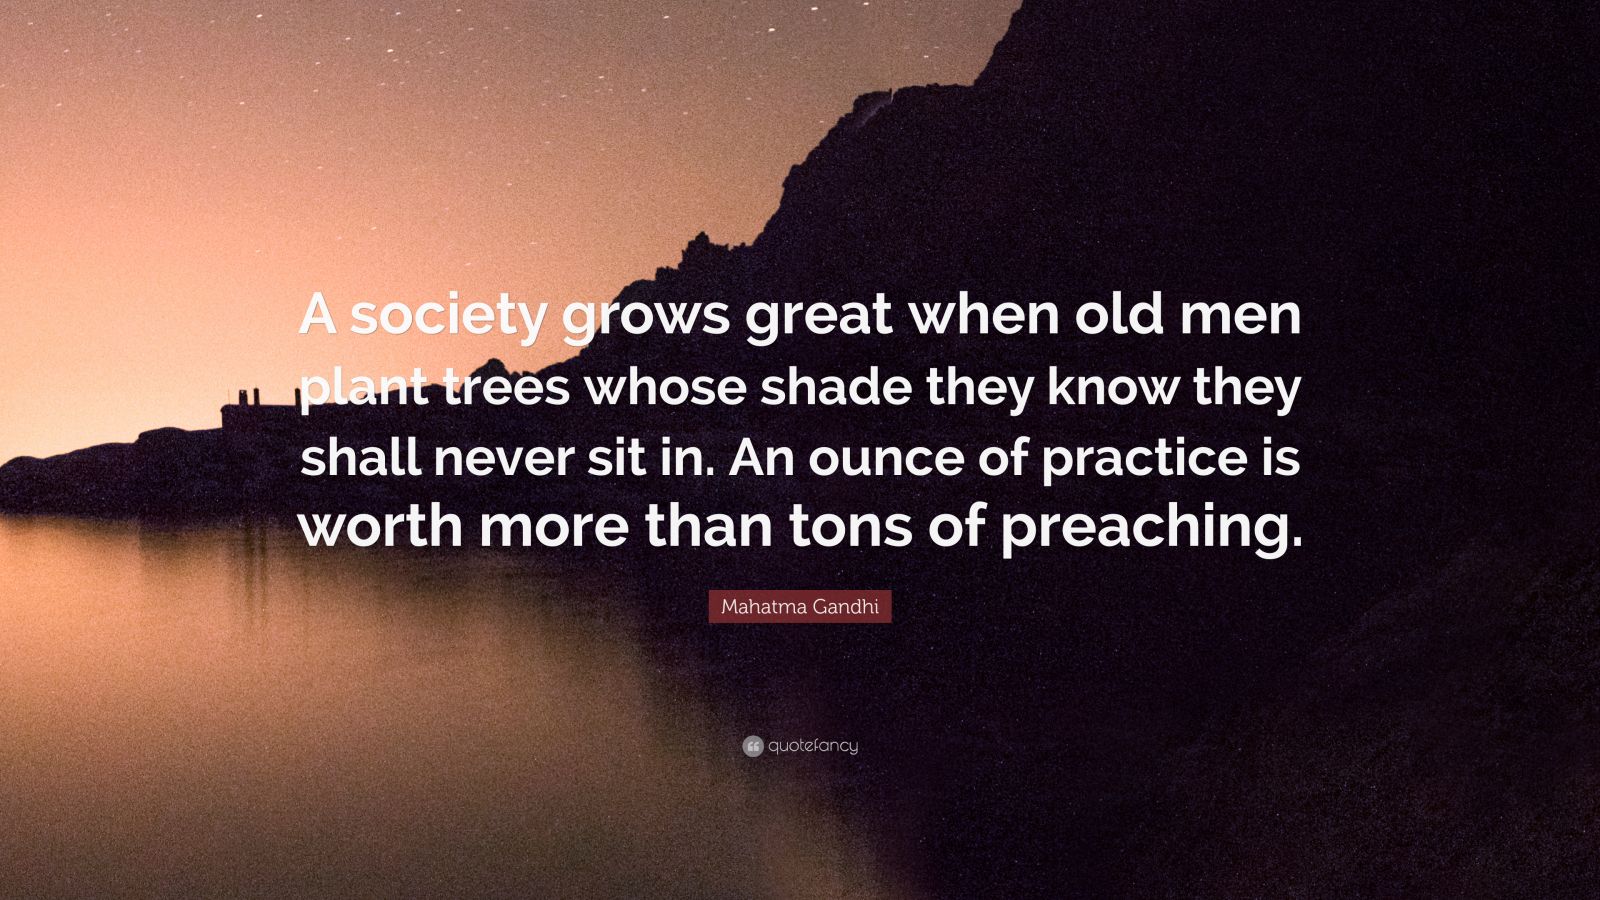 4708938 Mahatma Gandhi Quote A society grows great when old men plant